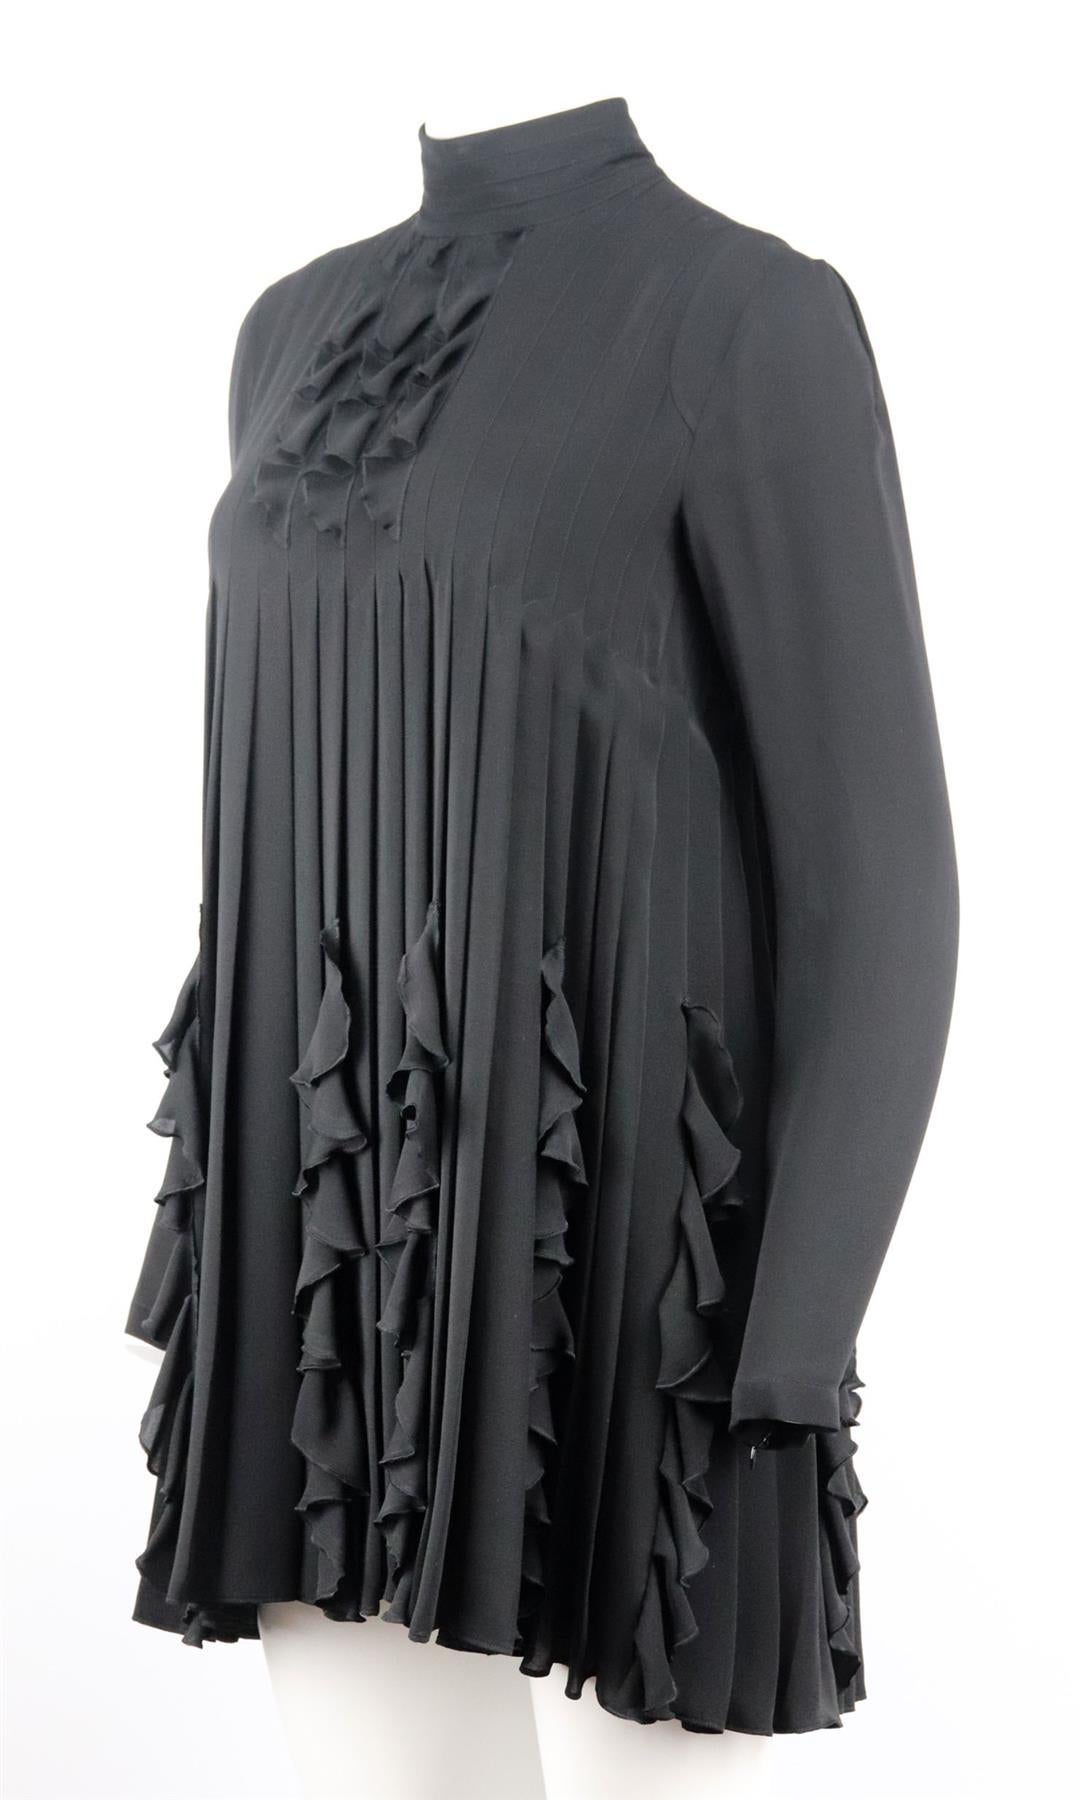 This dress by DSquared2 is cut from silk in a babydoll shape complete with a high-neck collar, pintucked yoke and ruffle trim with slightly puffed sleeves. Black silk. Concealed zip fastening at back. 100% Silk. Size: IT 44 (UK 12, US 8, FR 40).